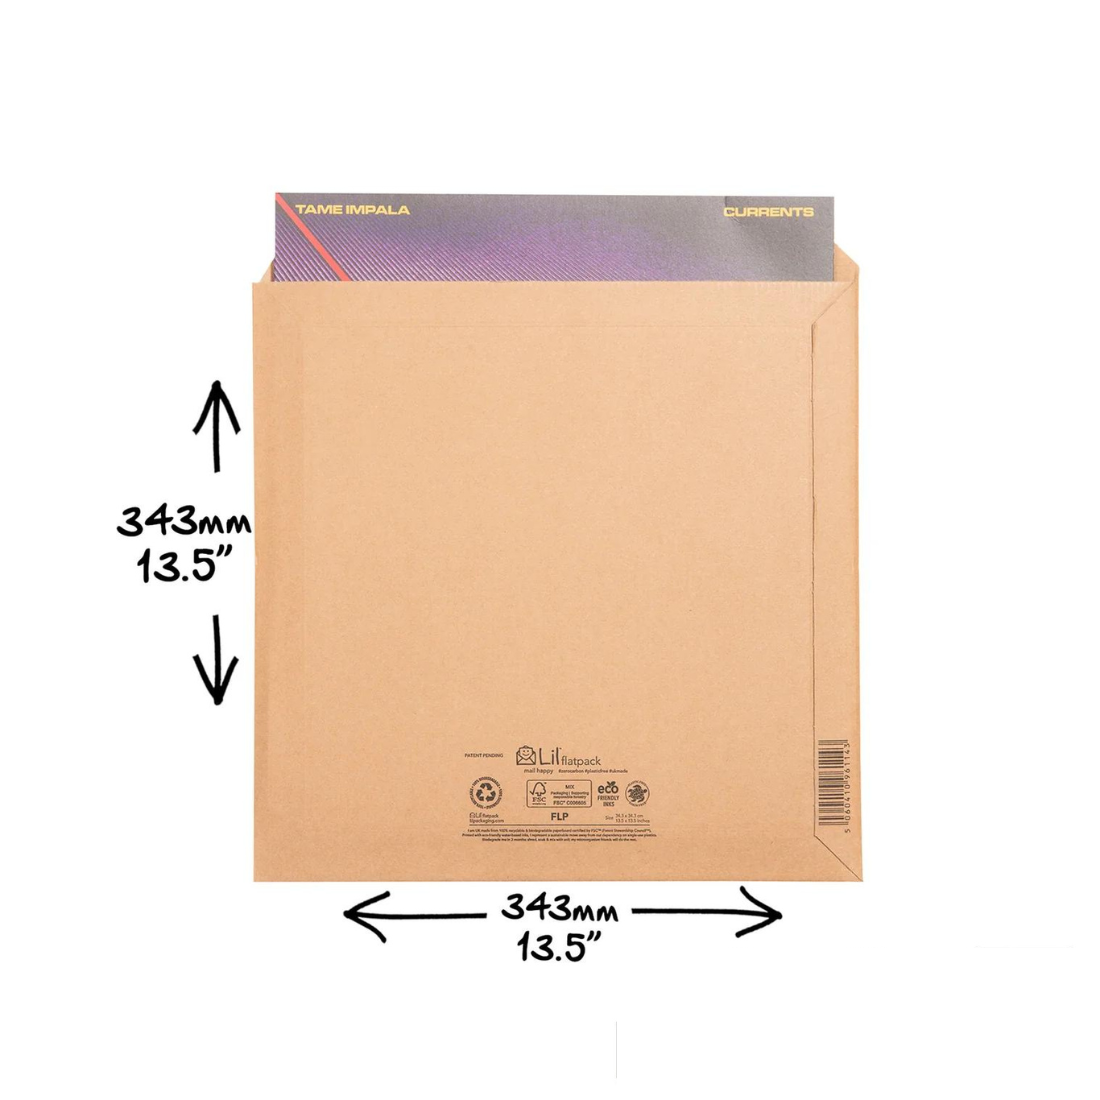 FLP Flatpack for packing - For up to three 12" Vinyl LPs  (PACK OF 50)